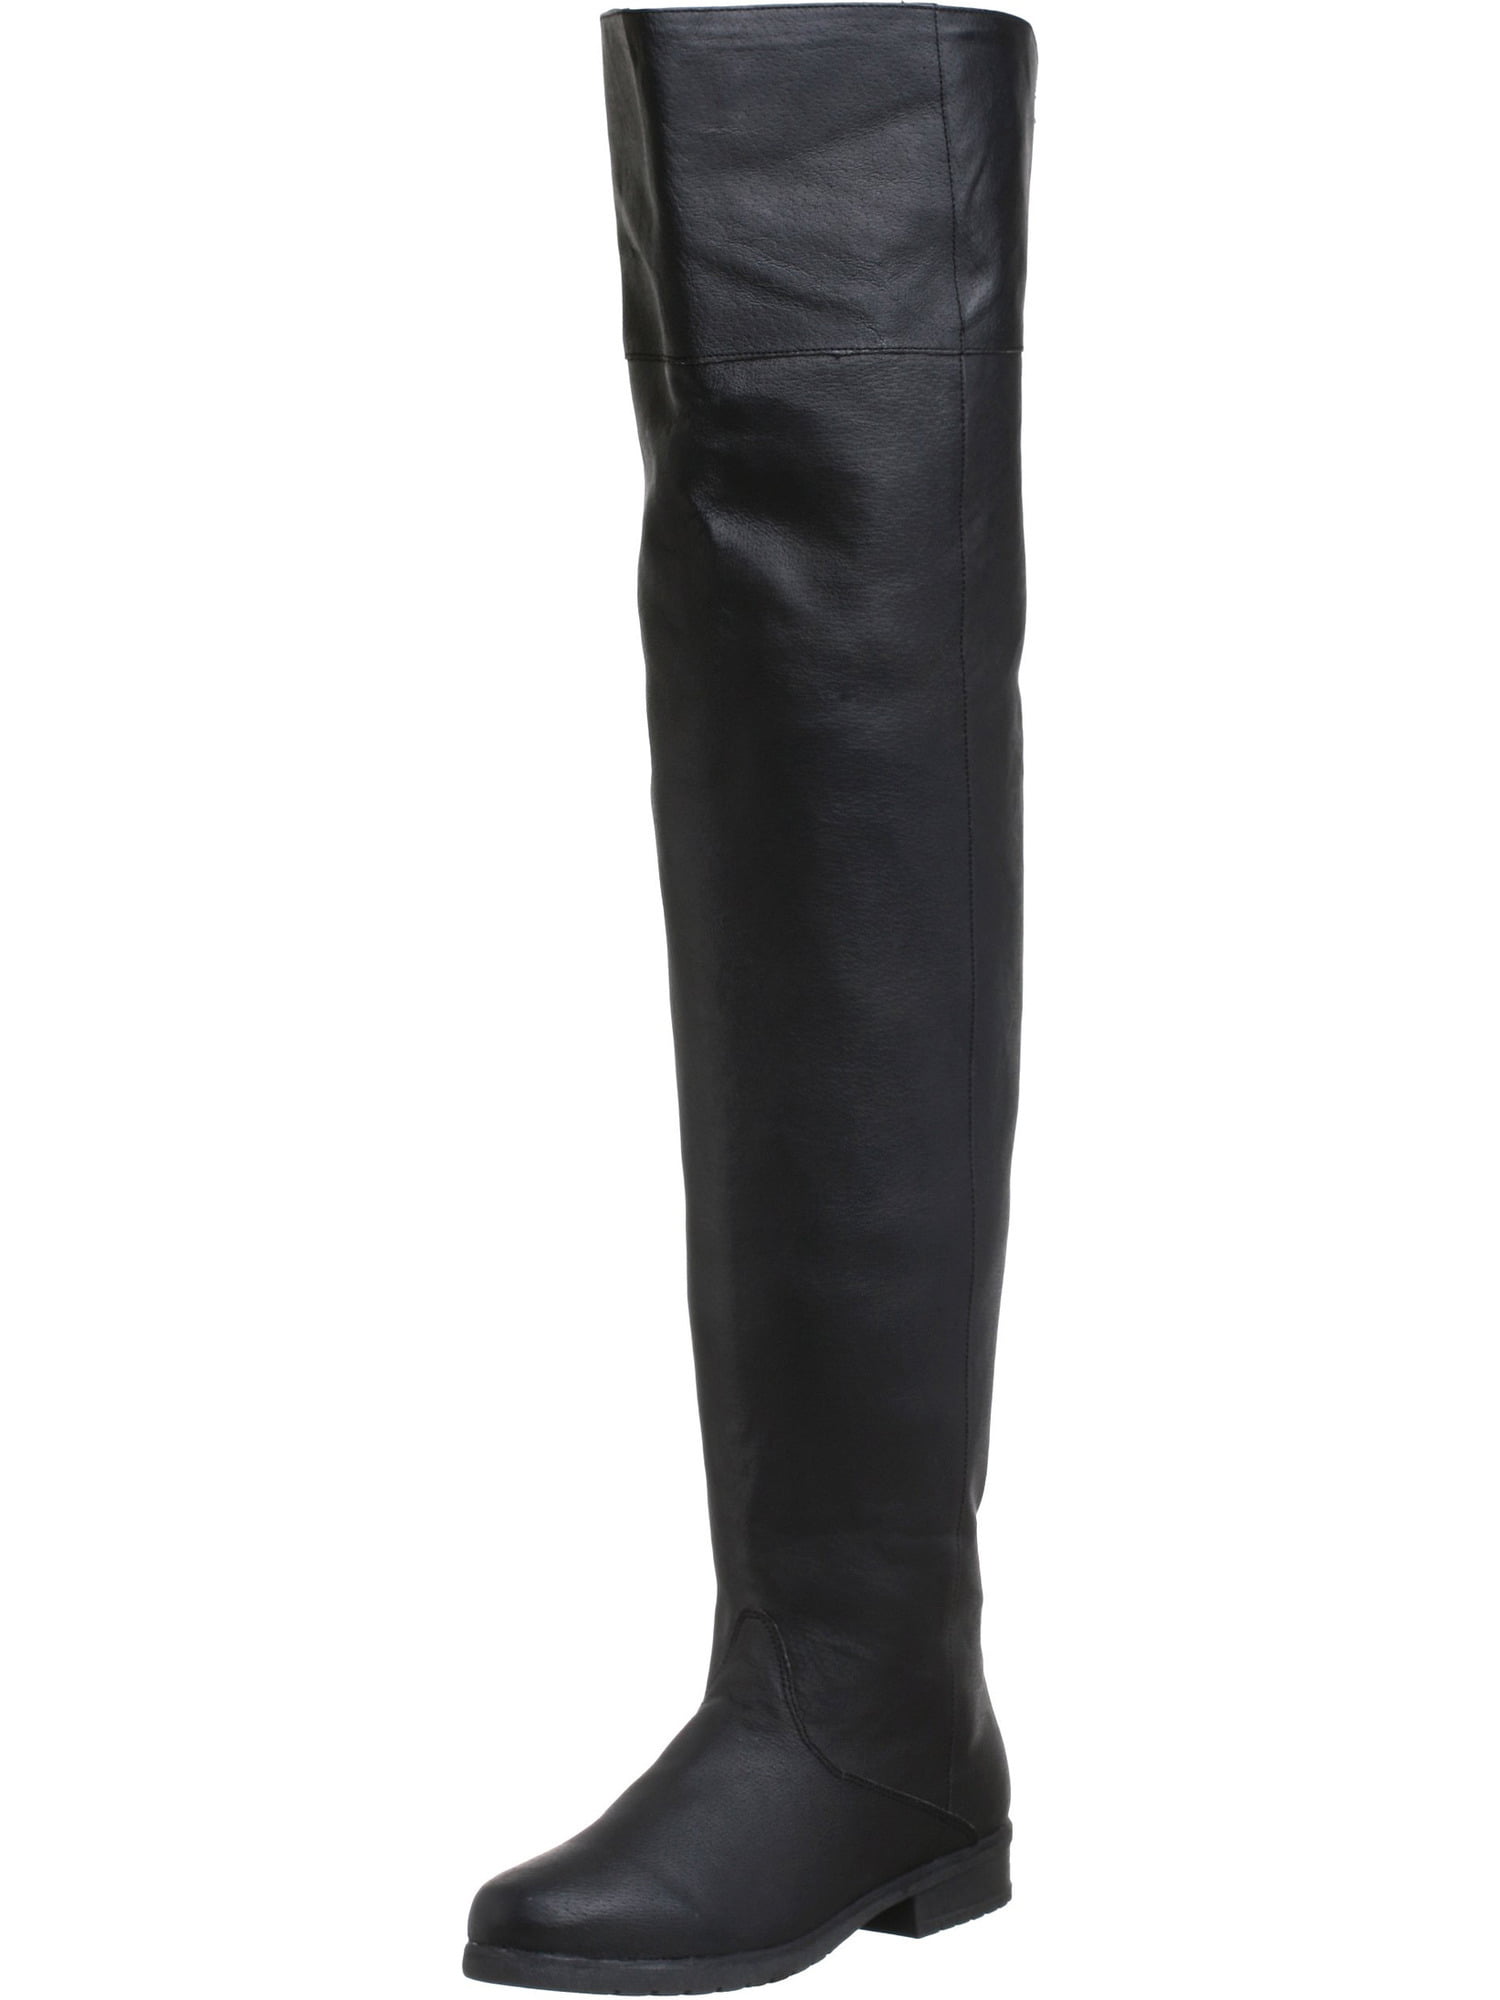 Mens Thigh High Boots Black Leather 